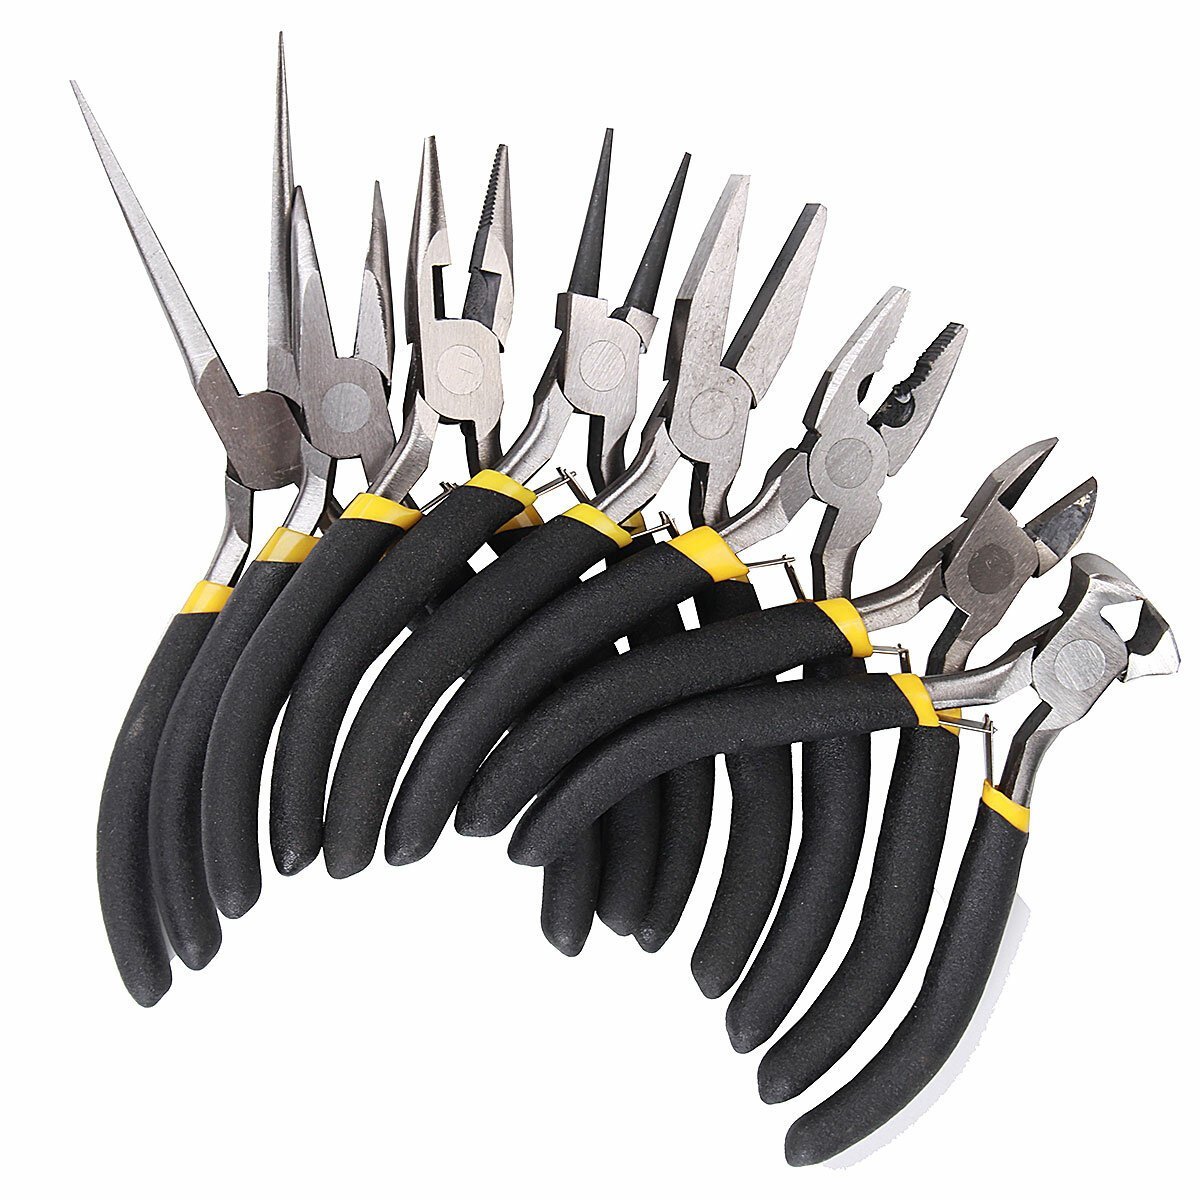 8pcs Mini Pliers / Wire Side Cutters Tool Set With Soft Grip Handles DIY Toolset